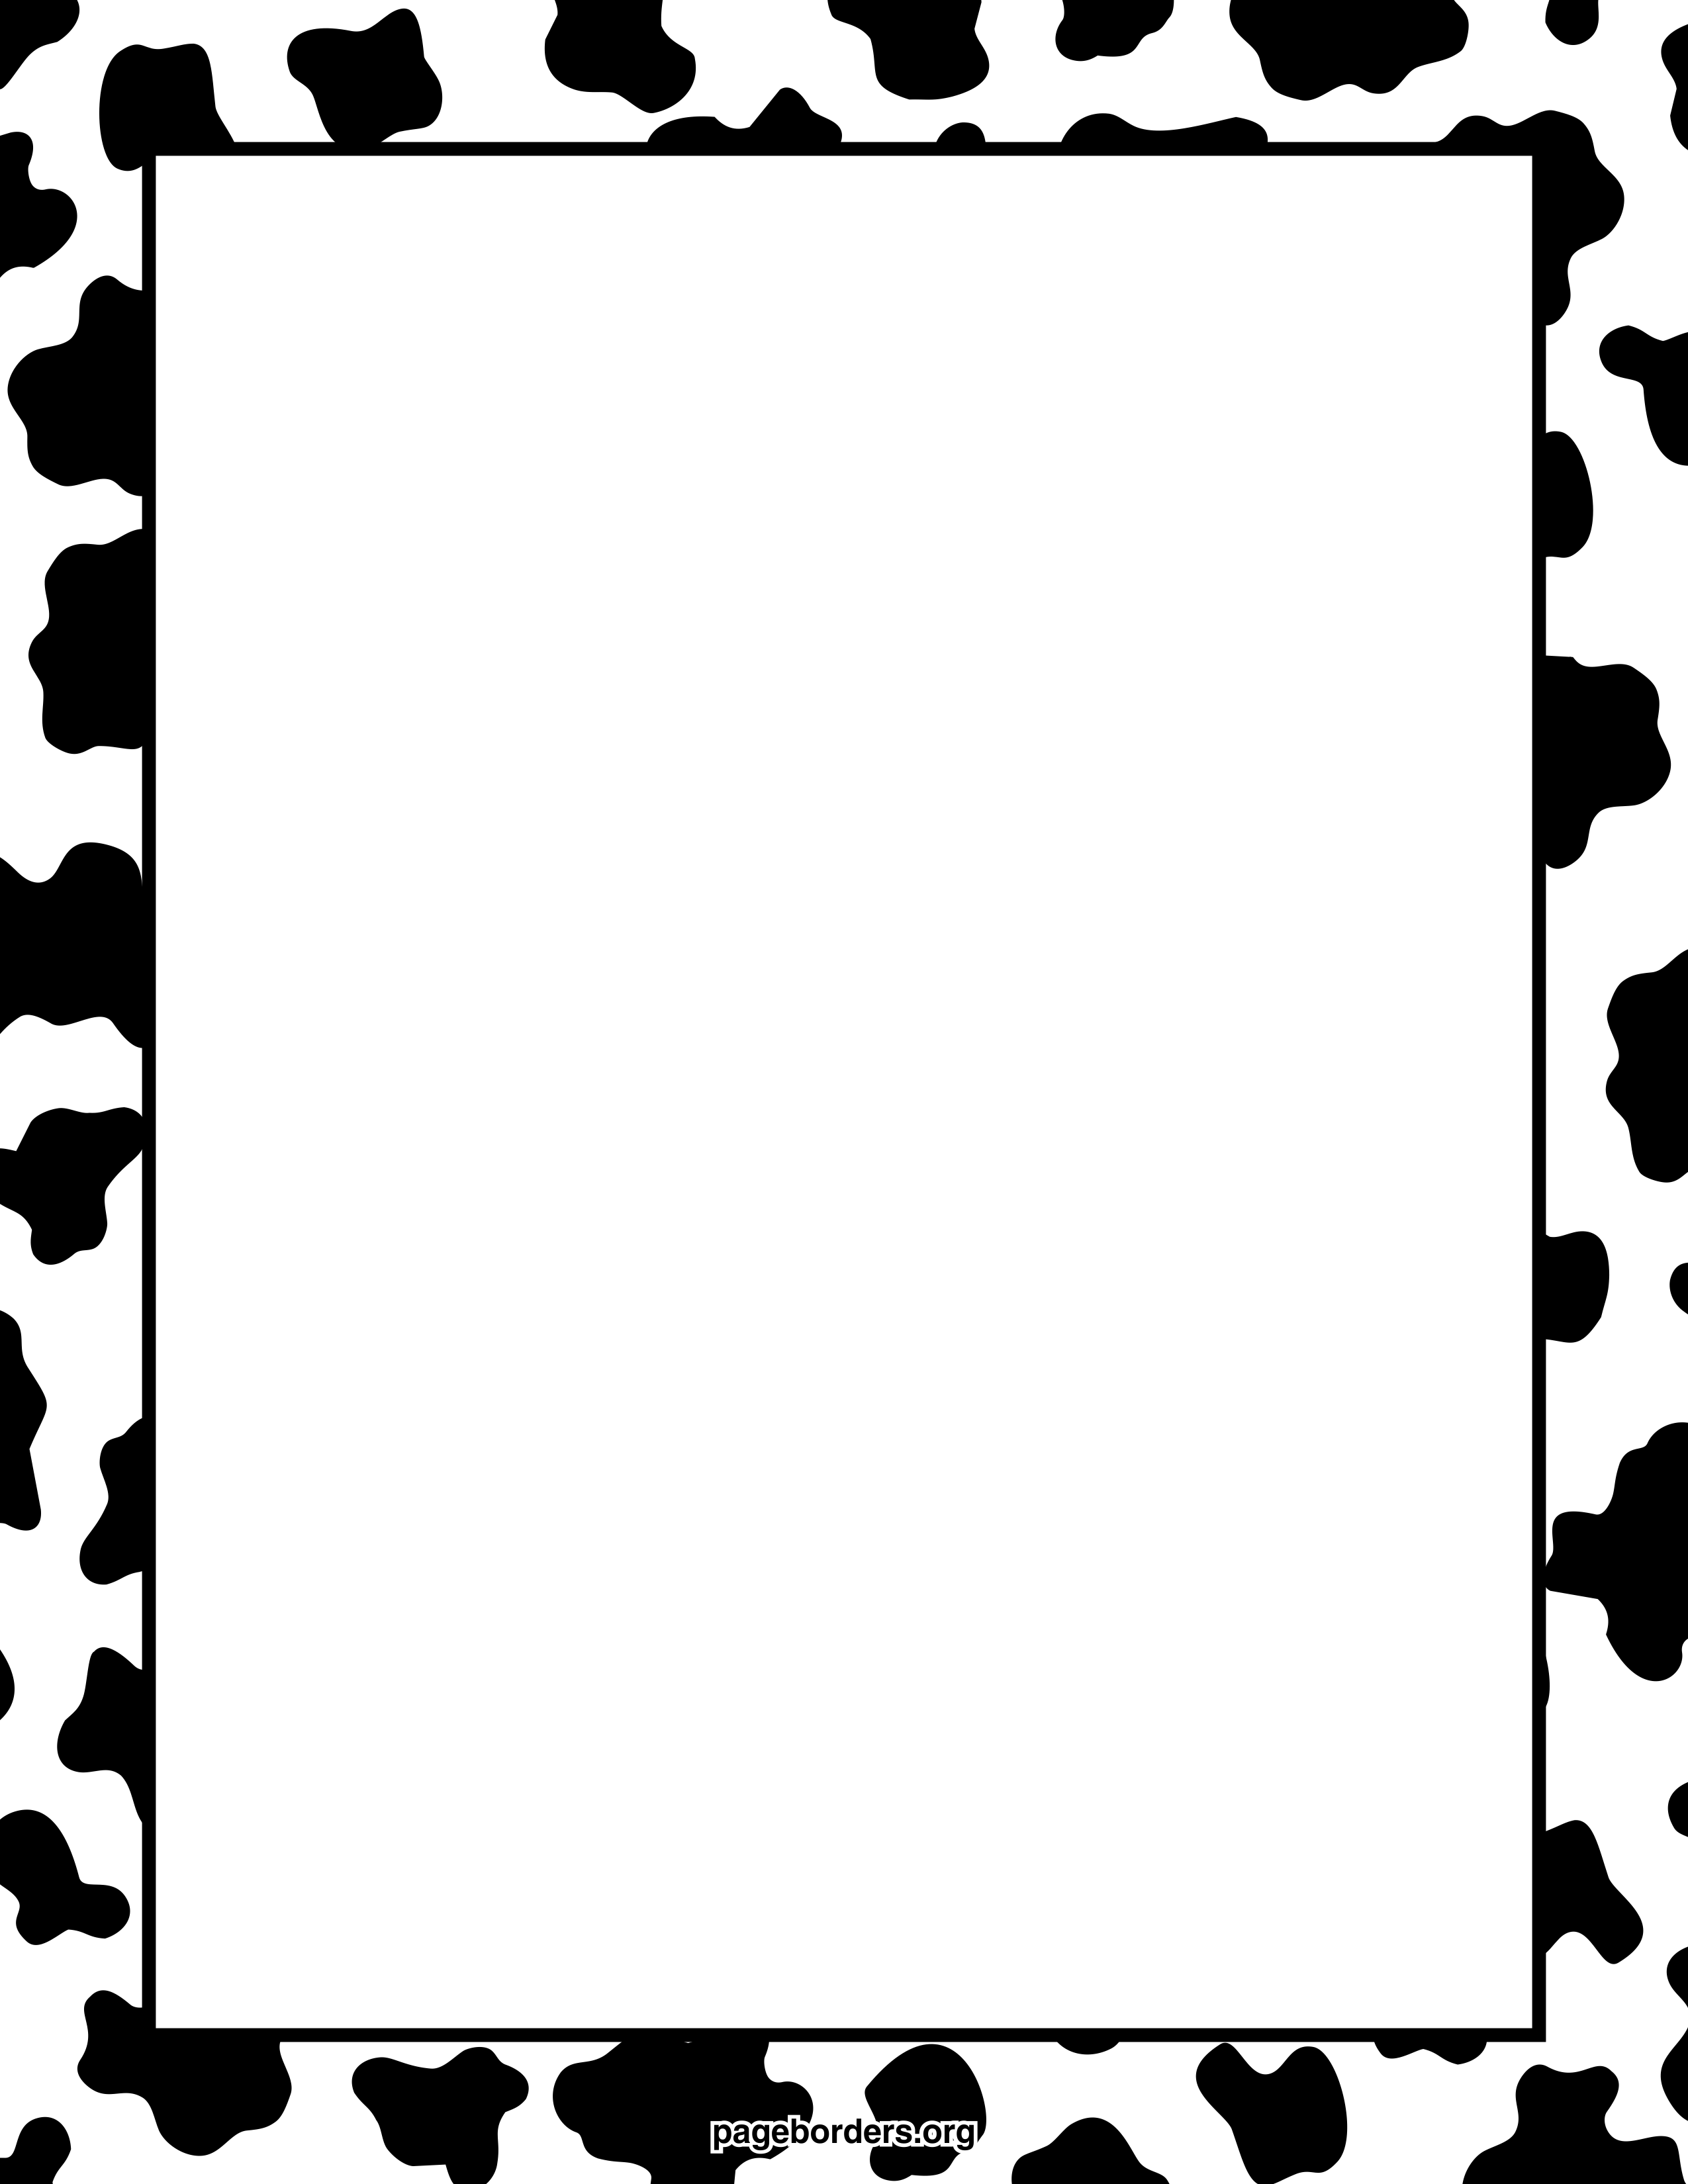 black and white cow clipart free - photo #26